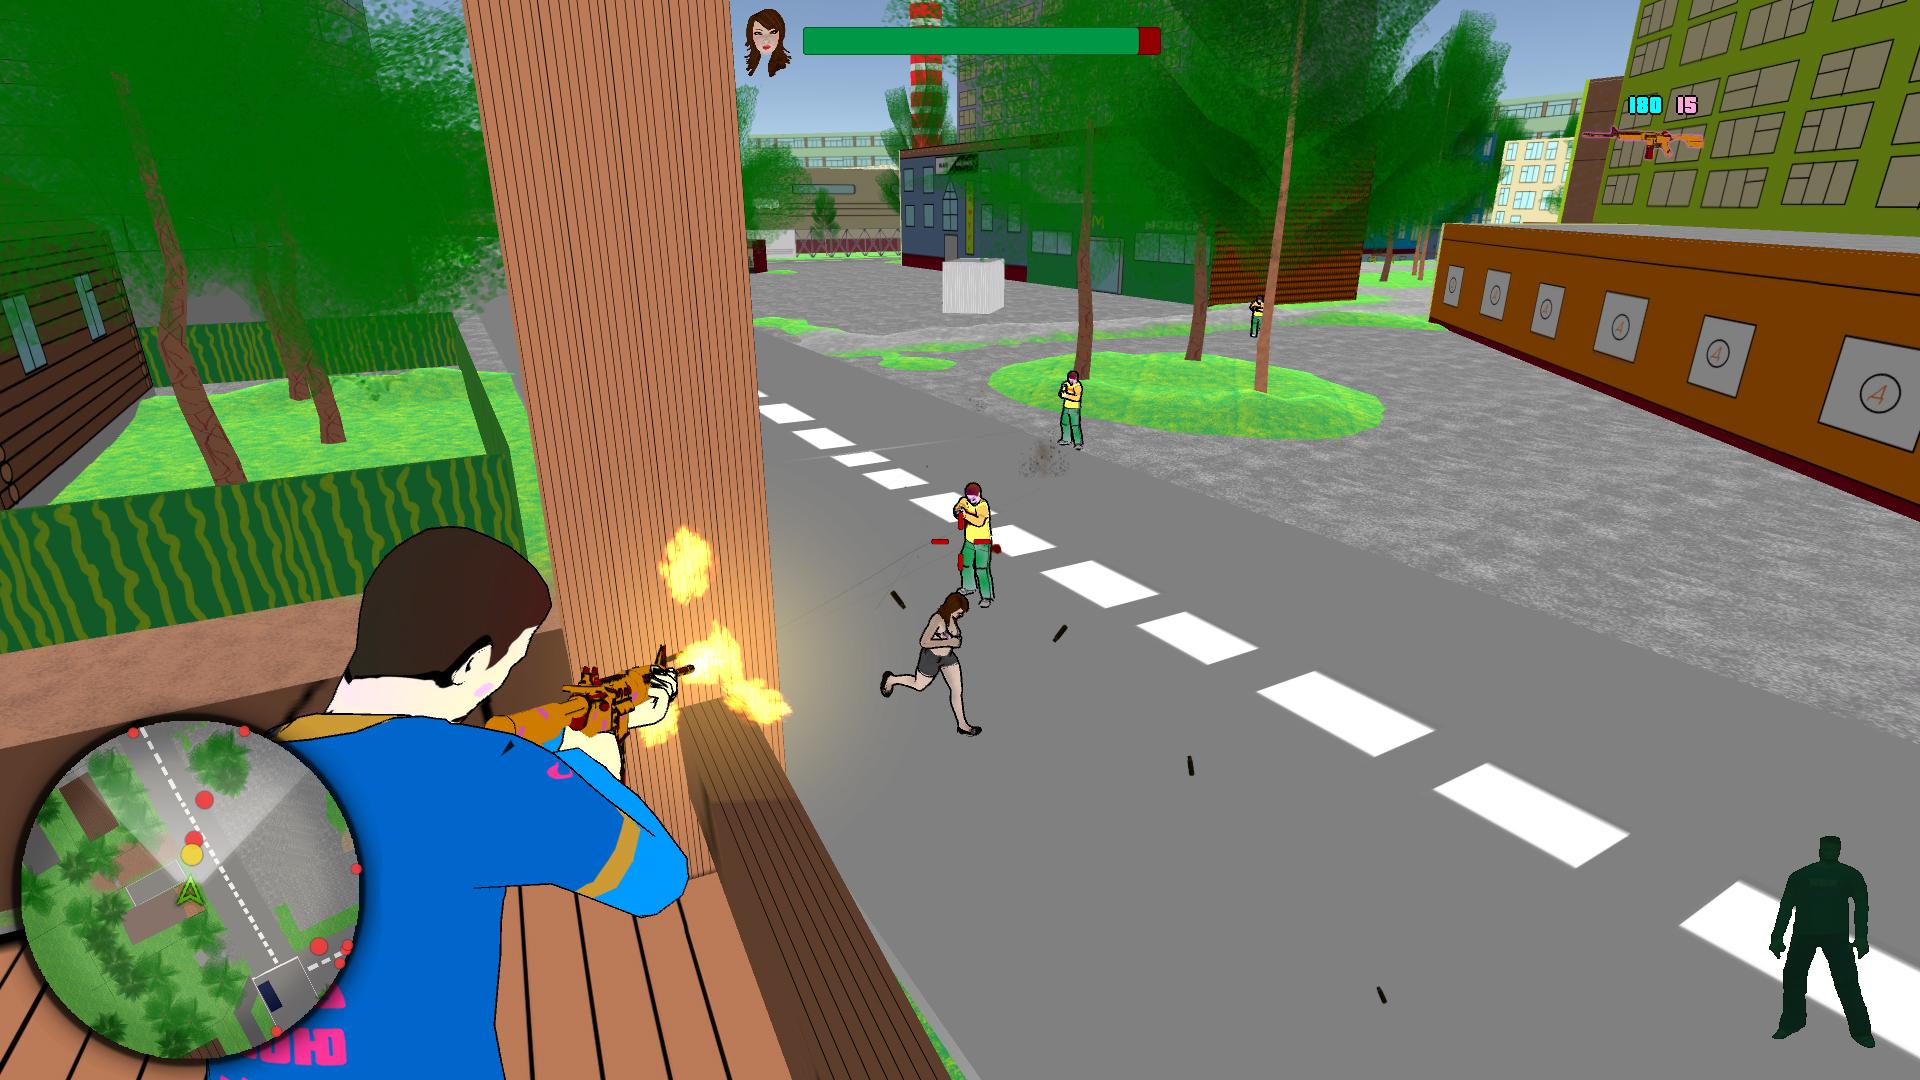 Screenshot №8 from game VCB: Why City (Beta Version)